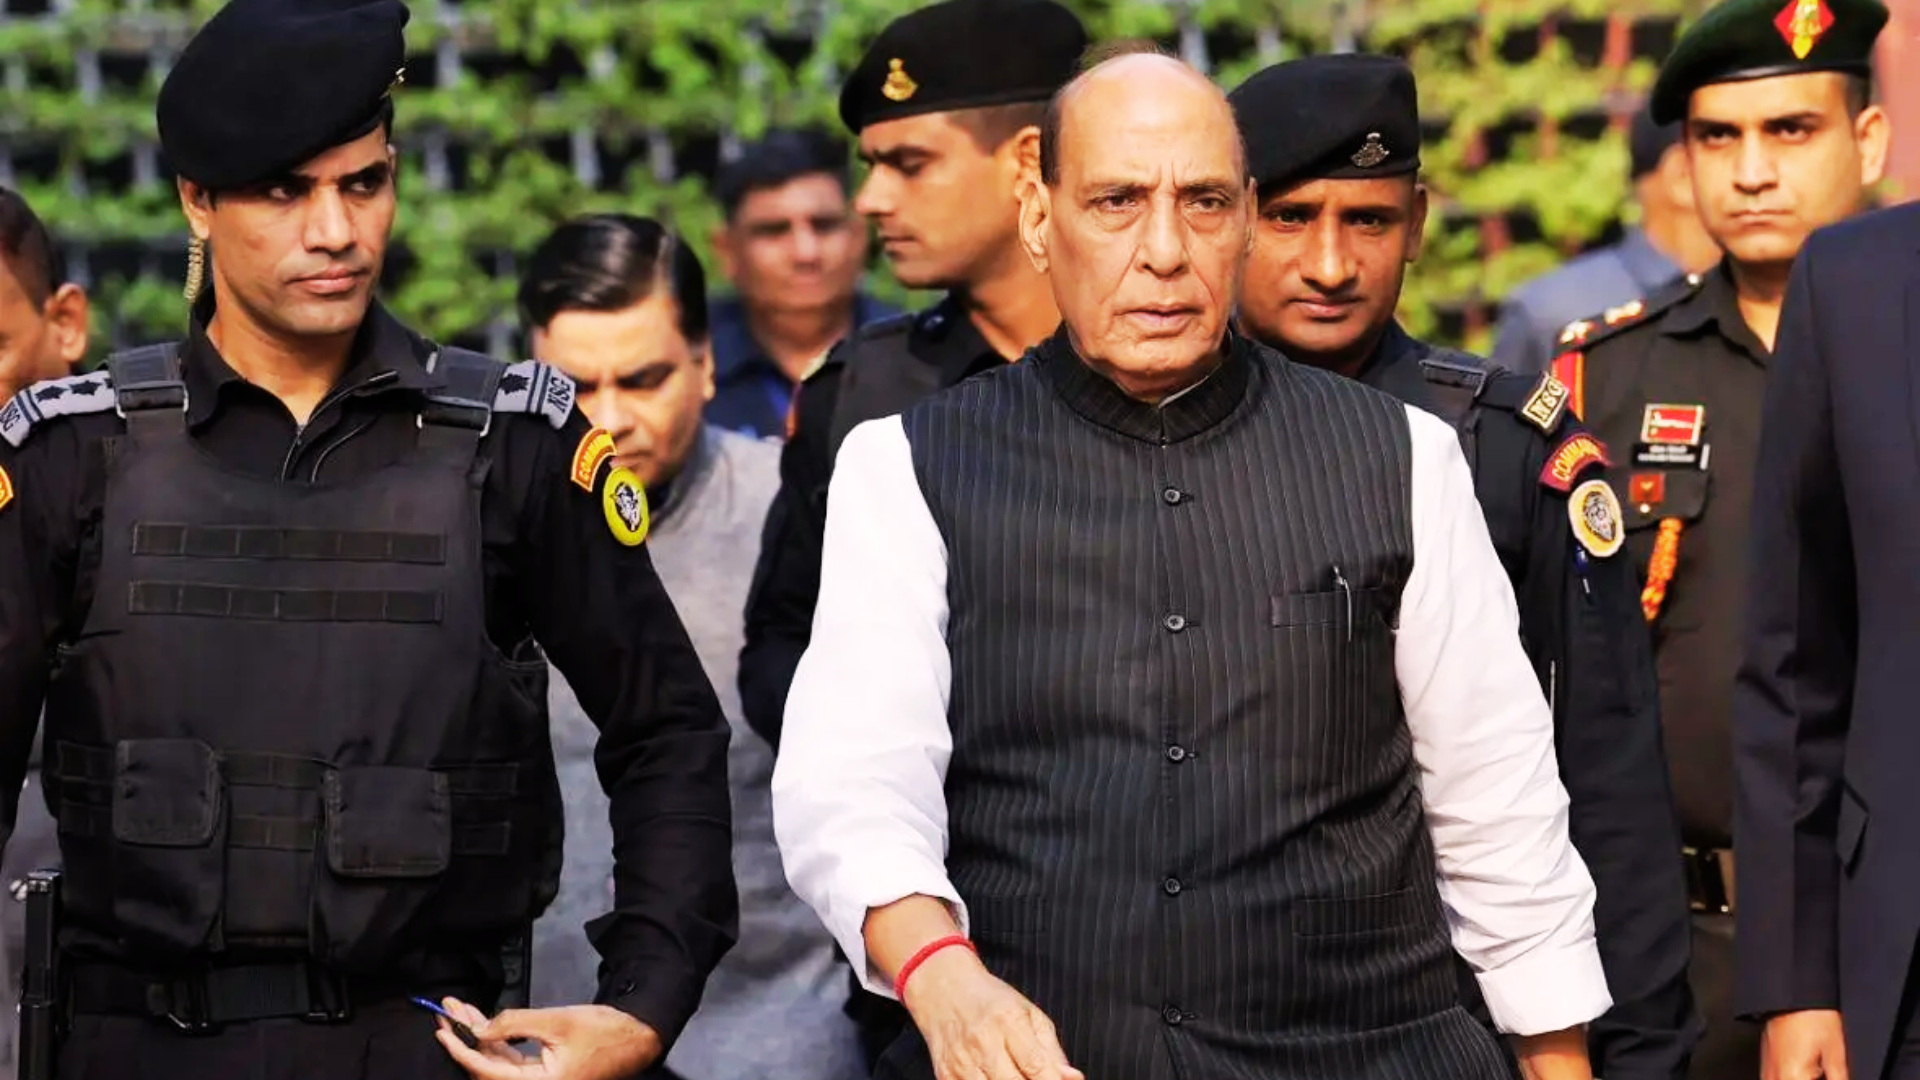 “If anyone attacks India, forces will respond strongly”: Rajnath Singh, Caution issued regarding China border dispute.